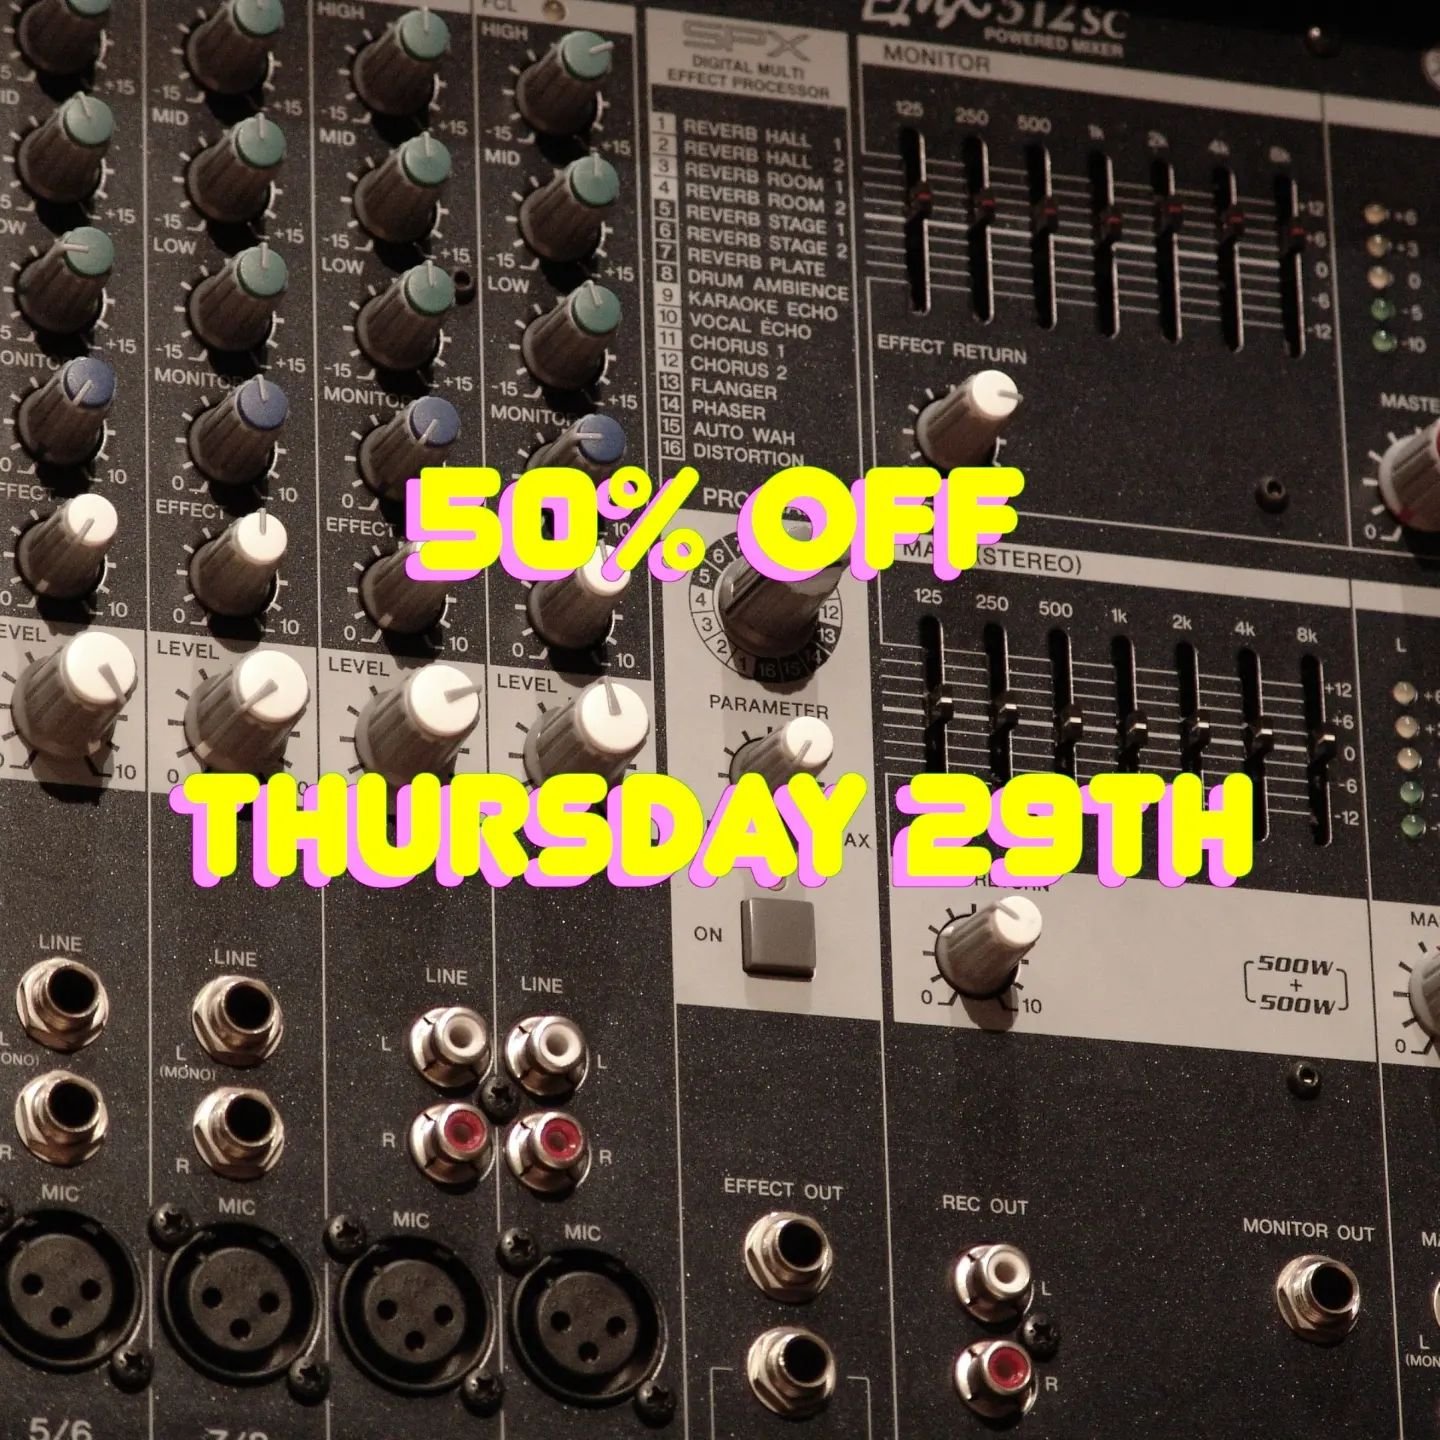 50% OFF ALL BOOKINGS TOMORROW THURSDAY 29TH SEPTEMBER

Hit the link in our bio to make a booking or call 01273 416699 or email info@monsterstudios.co.uk